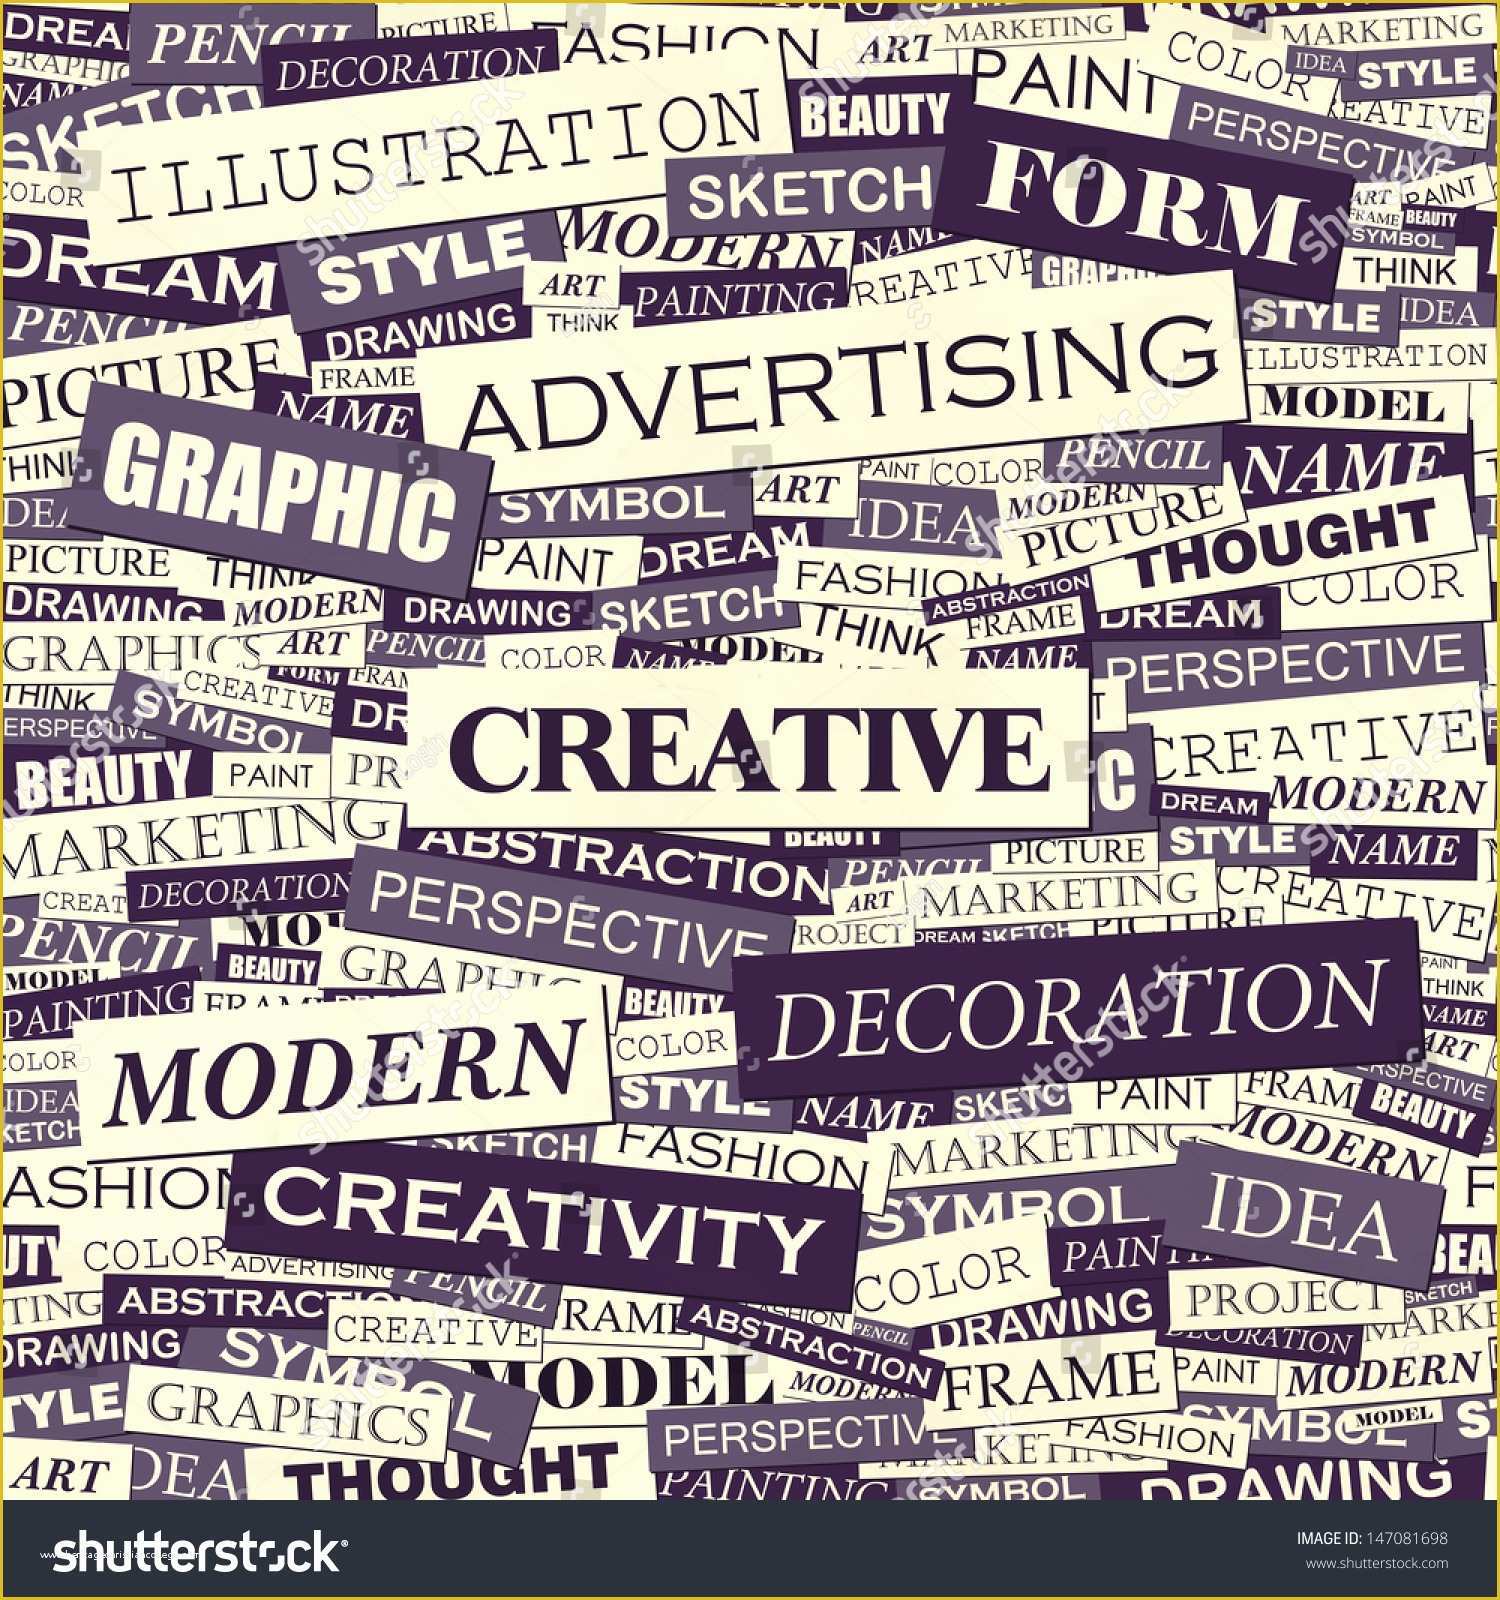 word-art-collage-template-free-of-creative-word-cloud-illustration-tag-cloud-stock-vector